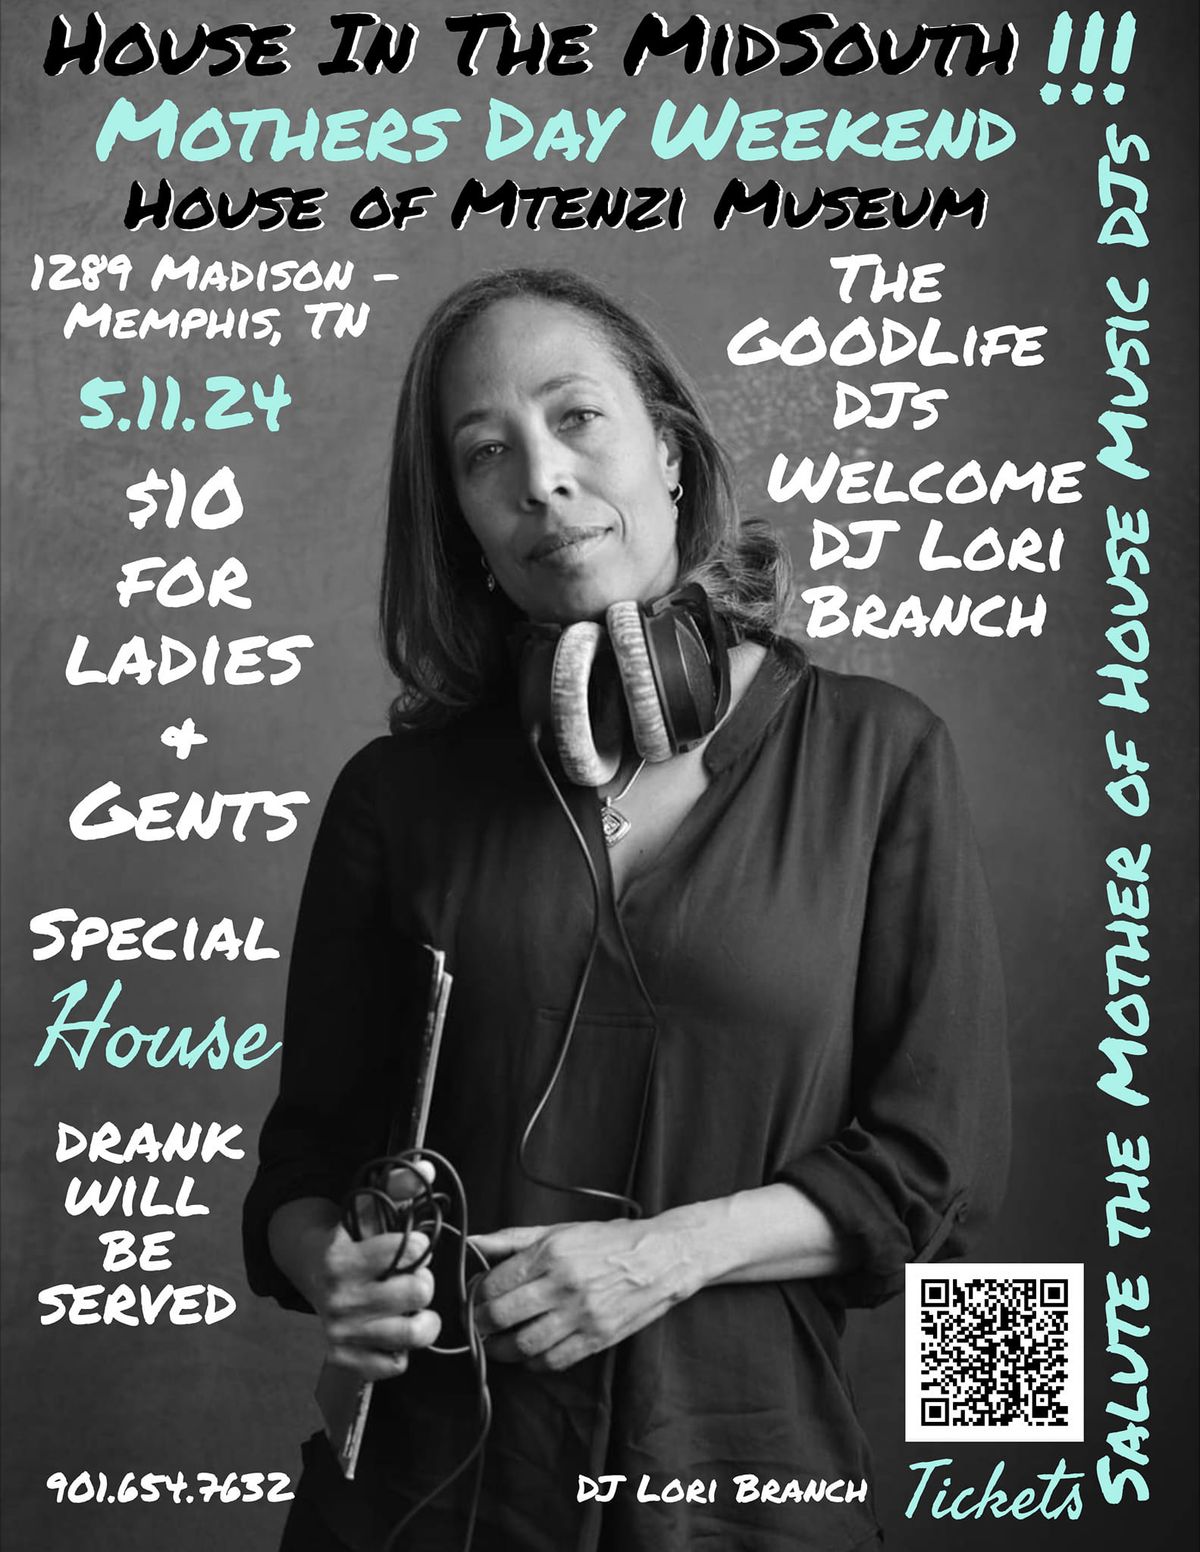 House In The MidSouth !!! salute to DJ Lori Branch 